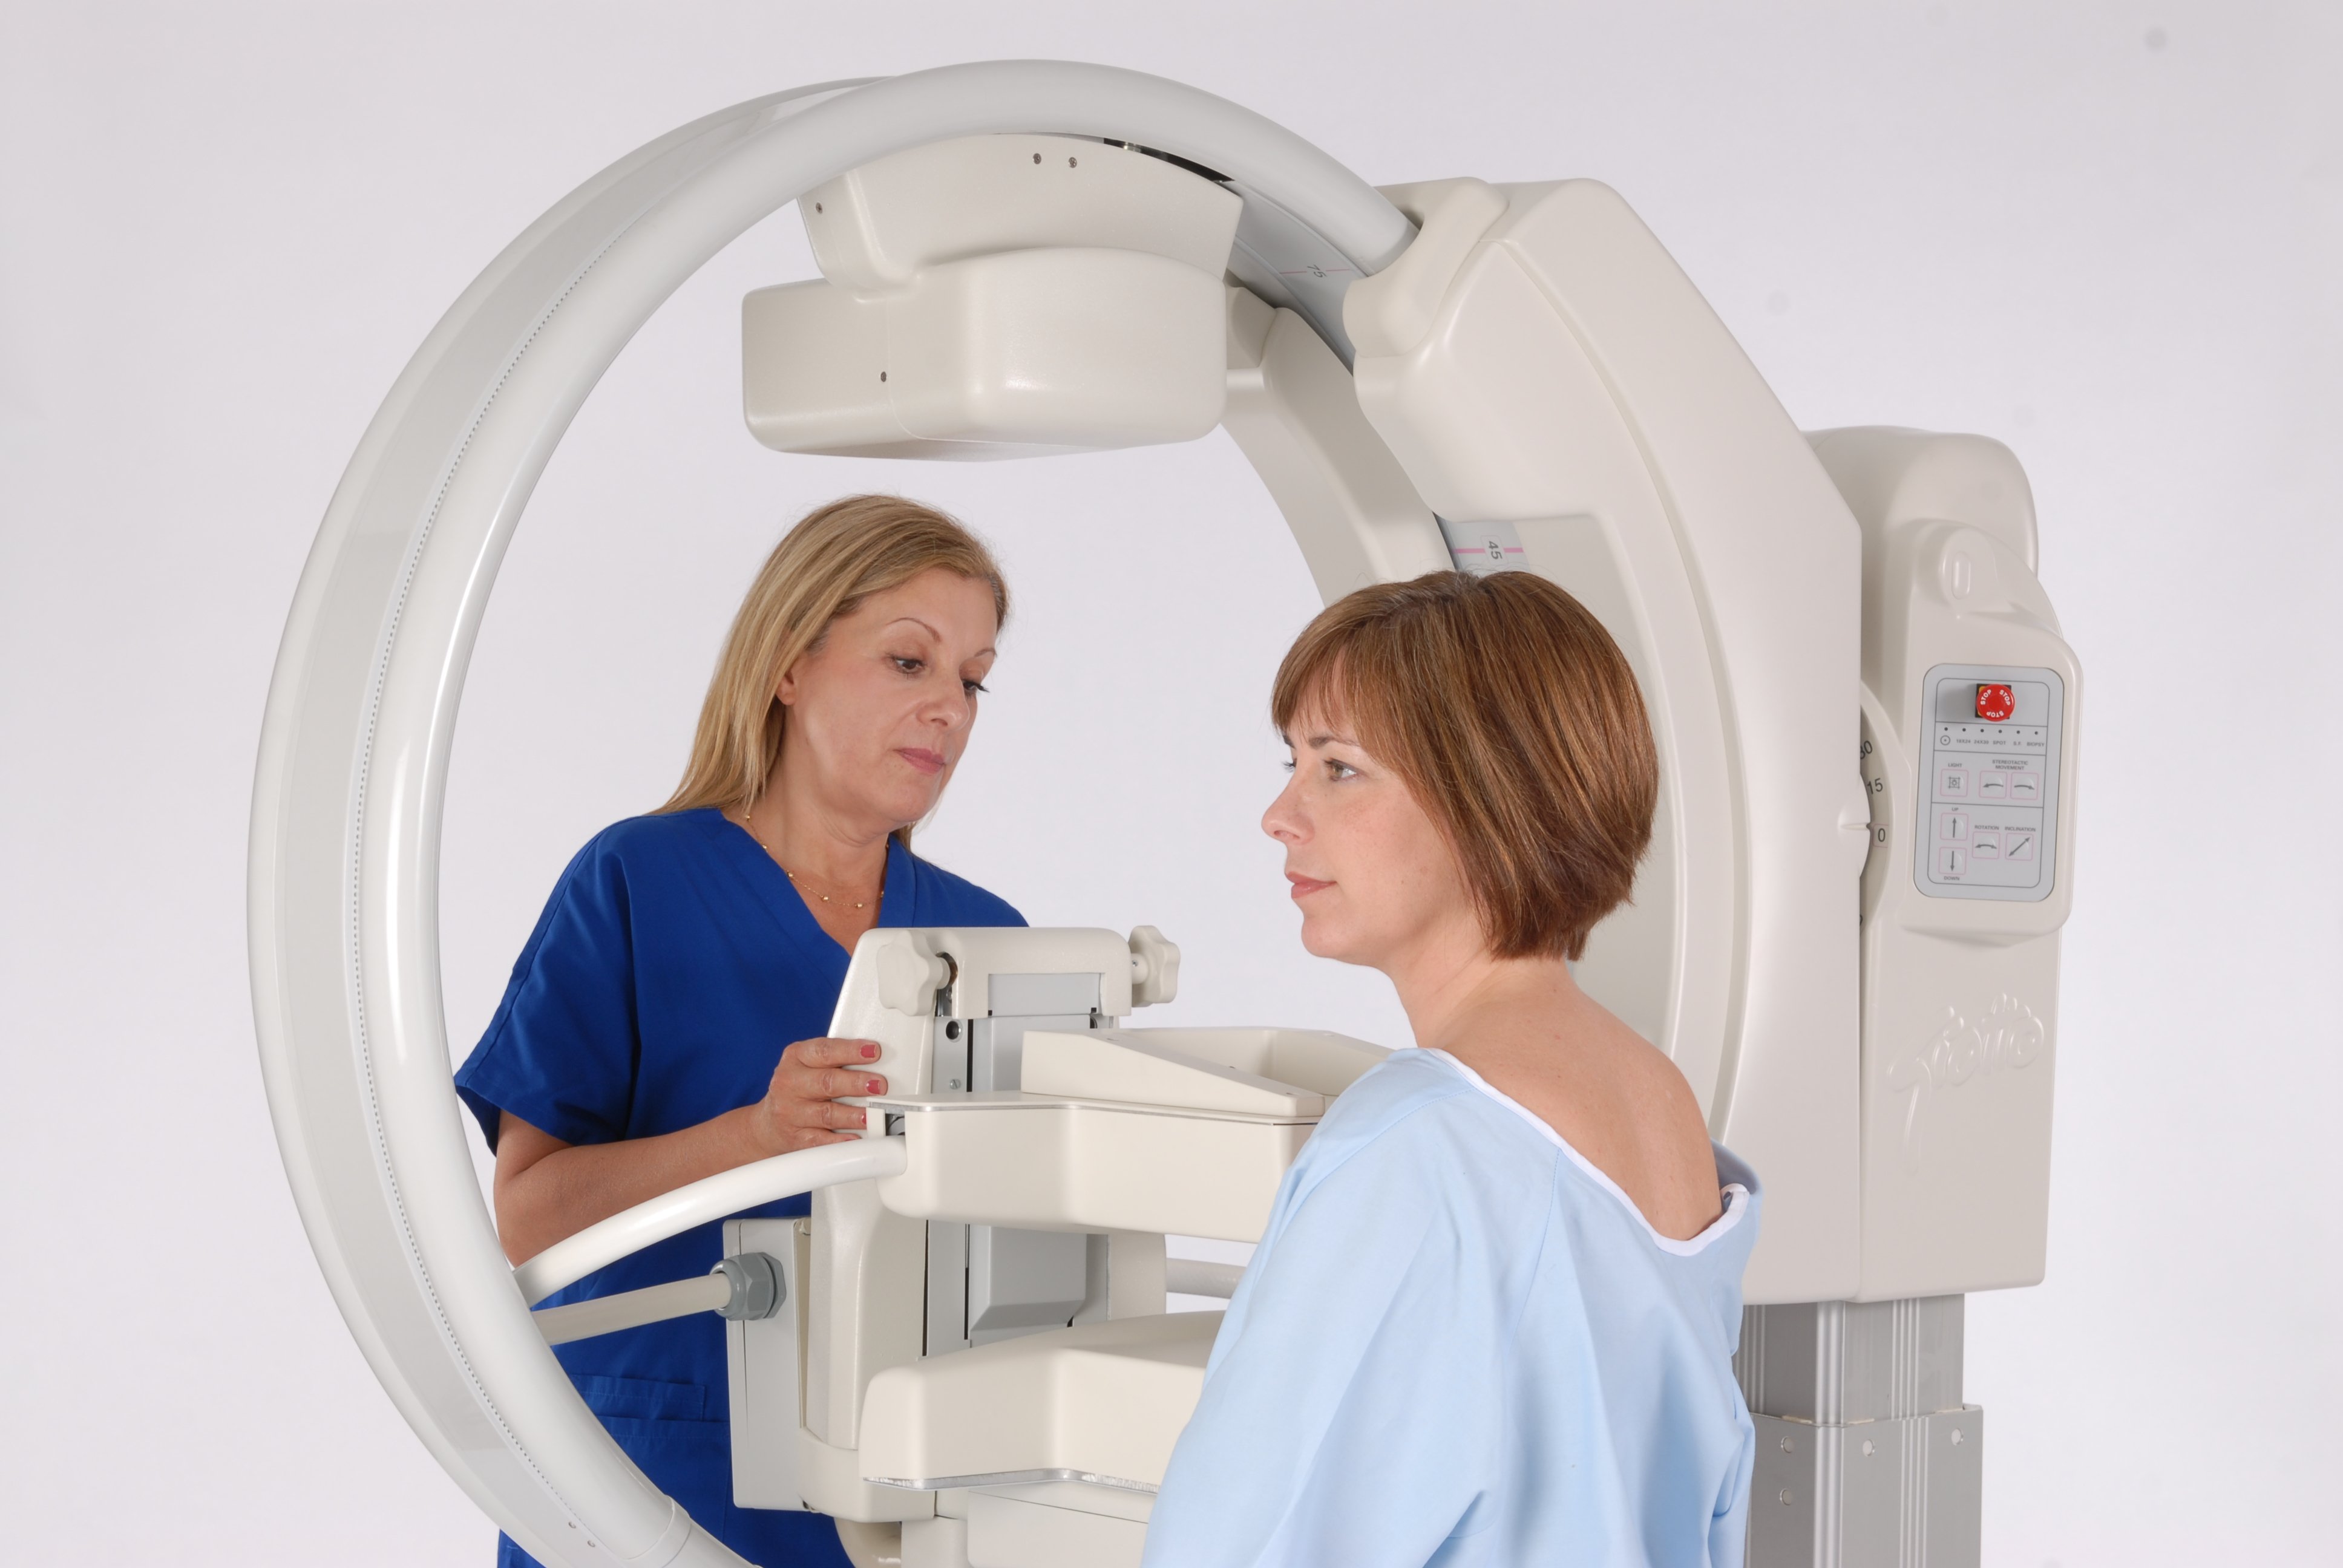 mammography systems, women's health, nuclear imaging, clinical trial